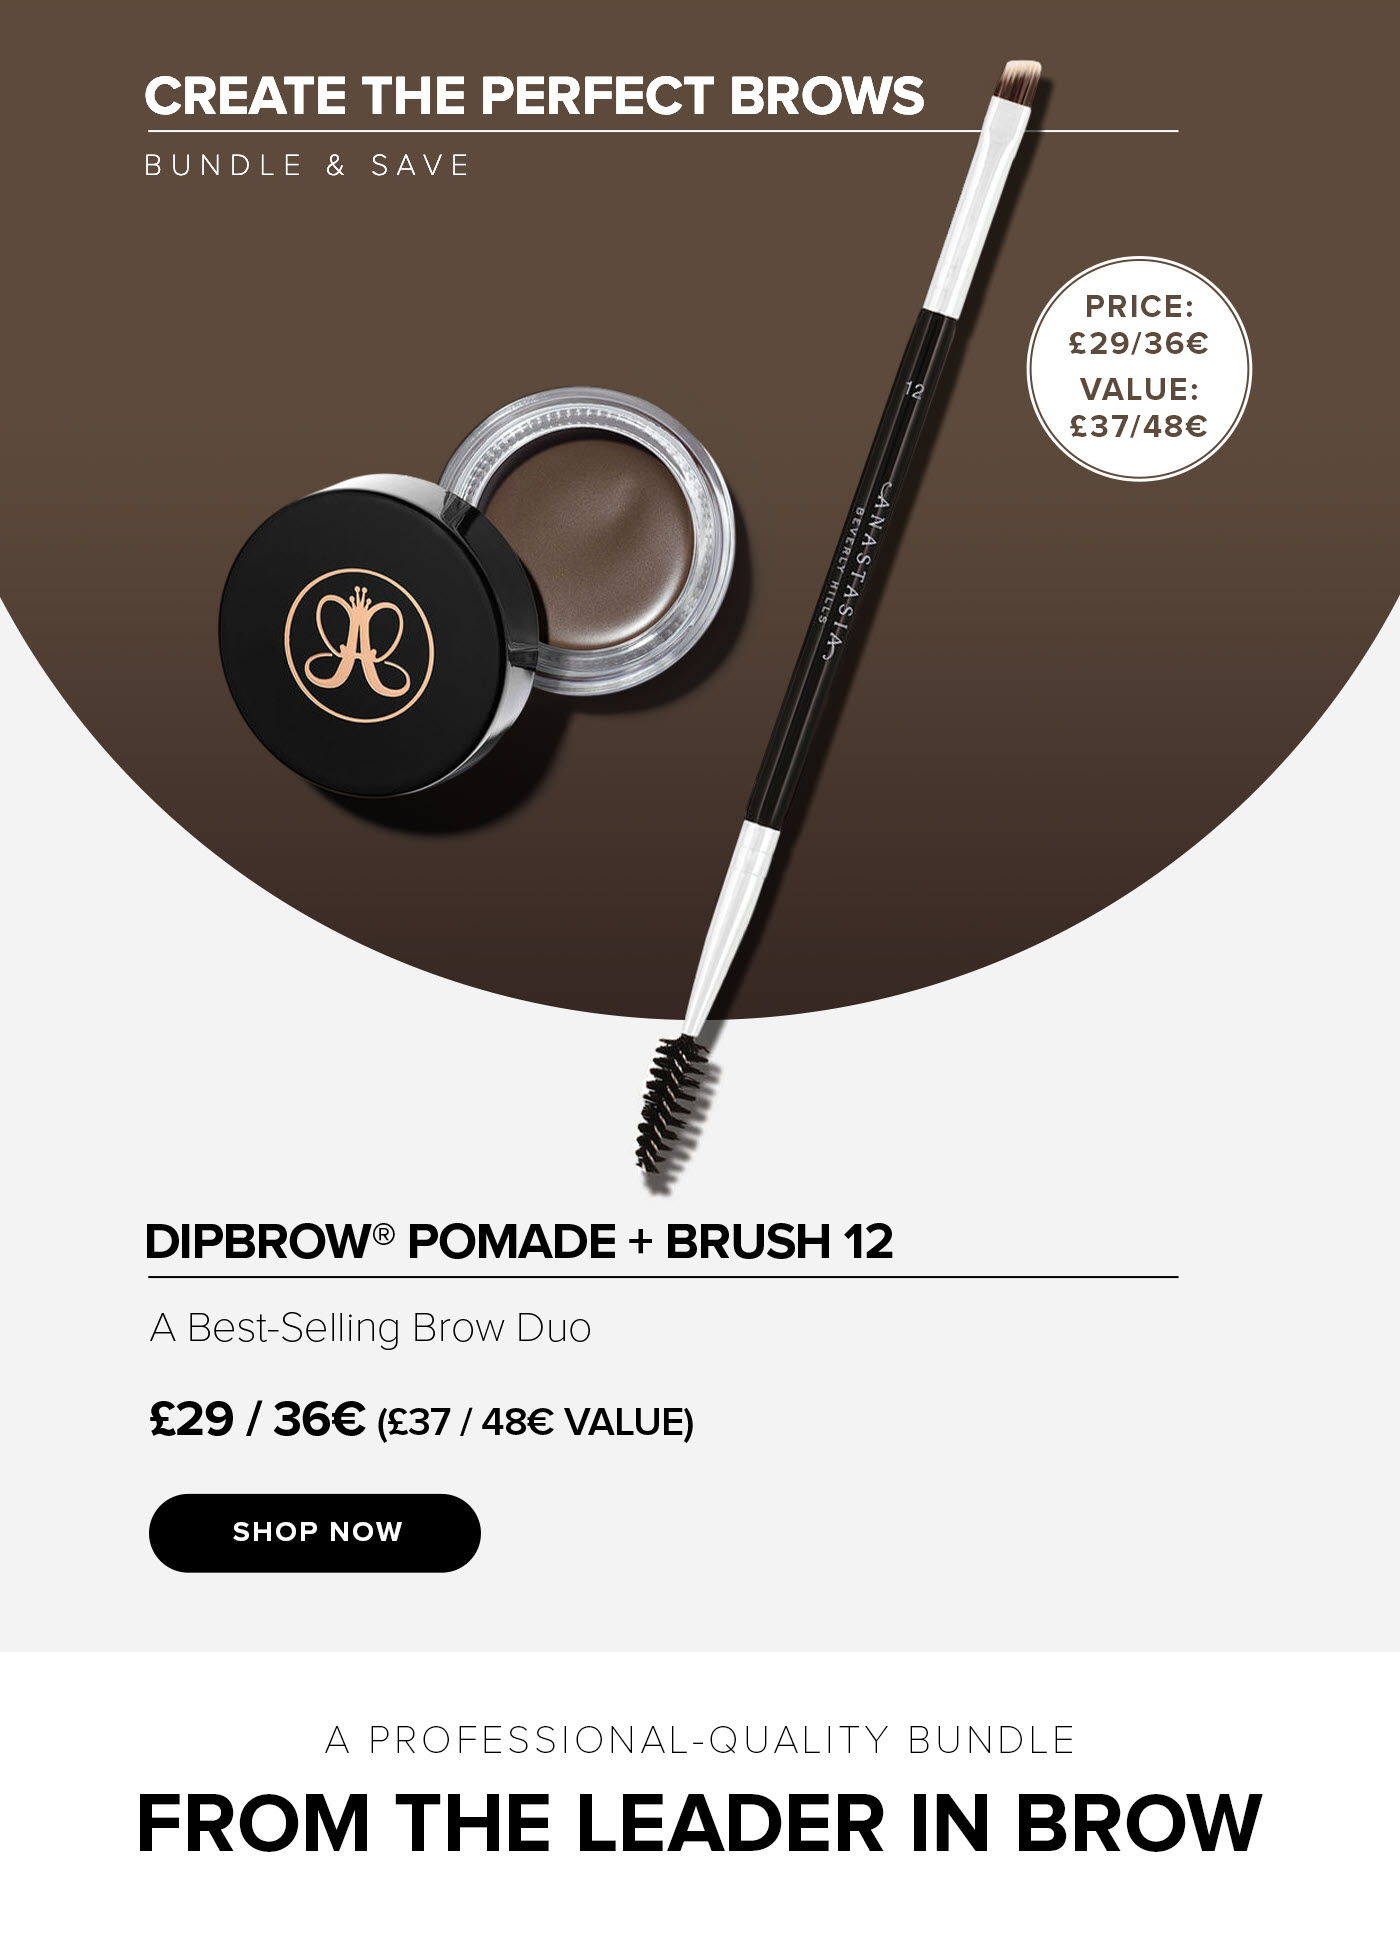 DIPBROW POMADE + BRUSH 12 - A Best-Selling Brow Duo - Shop Now